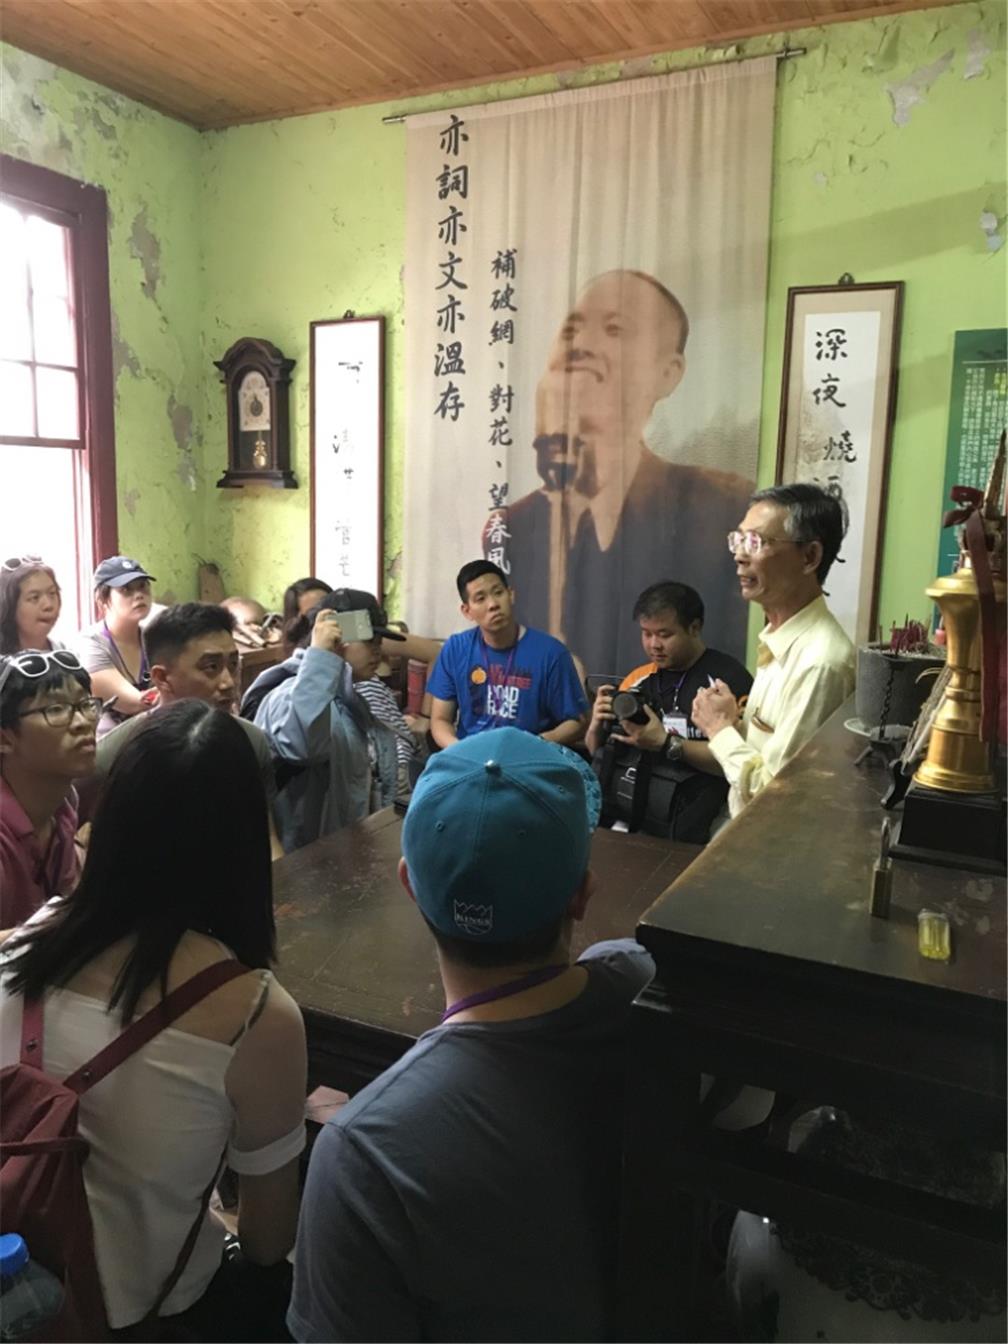 Taiwanese American Professionals delegation visited the house of a famous song writer Lee Lim-Chiu in 1930s